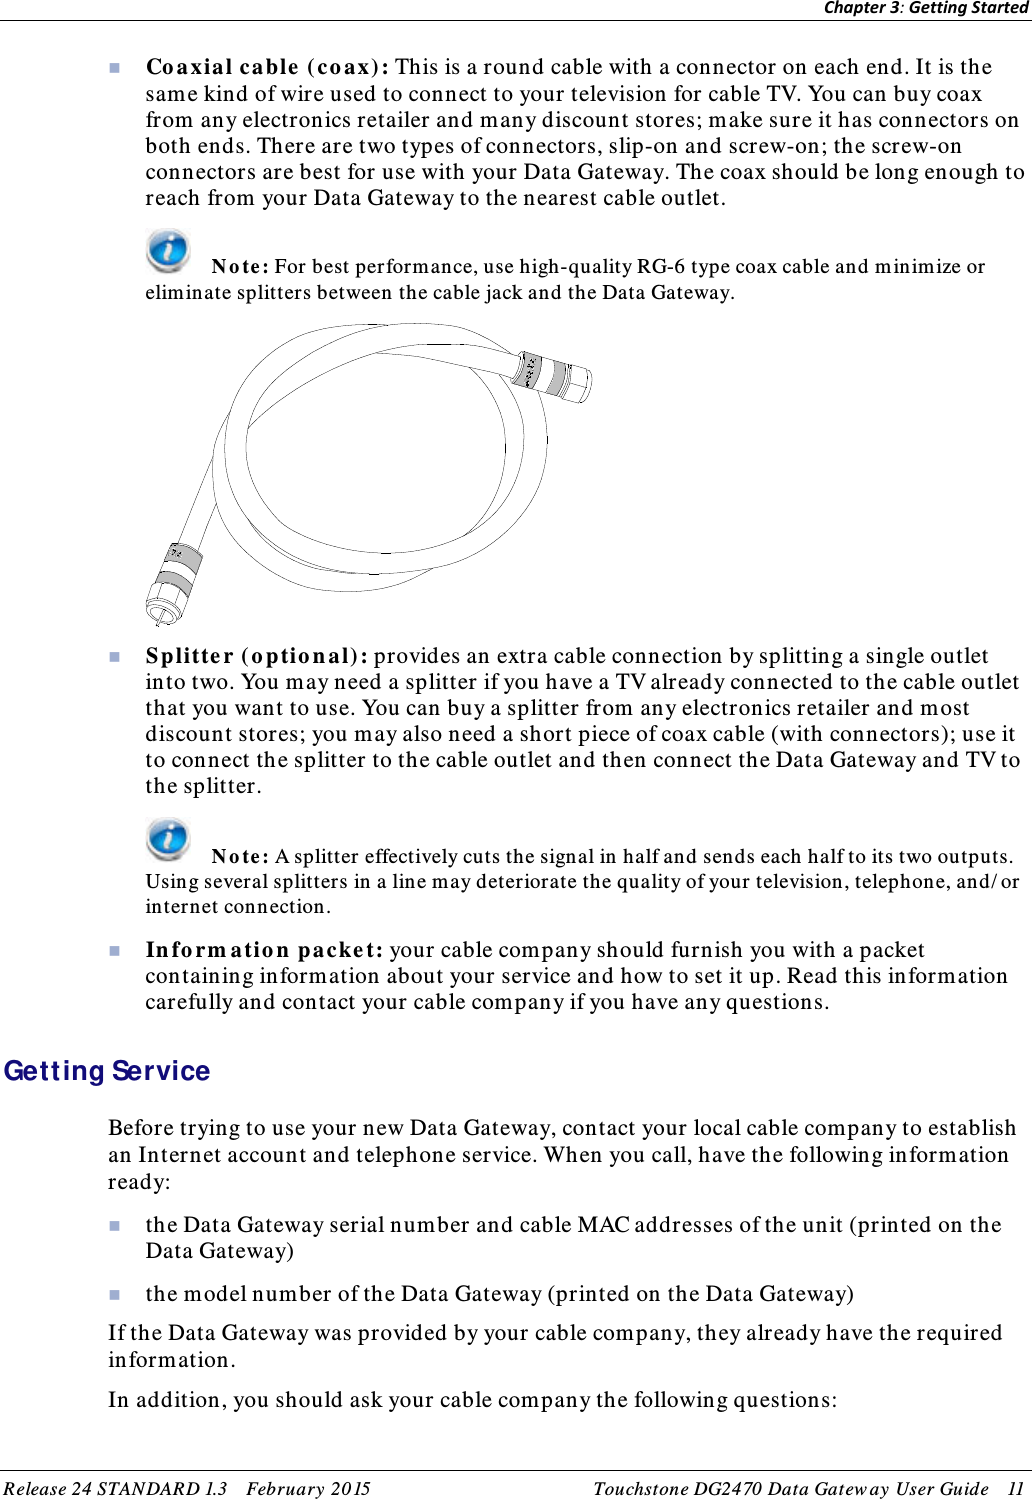 Chapter 3: Getting Started   Co a xial ca ble  ( co ax) : This is a round cable with a connector on each end. It is the same kind of wire used to connect to your television for cable TV. You can buy coax from any electronics retailer and many discount stores; make sure it has connectors on both ends. There are two types of connectors, slip-on and screw-on; the screw-on connectors are best for use with your Data Gateway. The coax should be long enough to reach from your Data Gateway to the nearest cable outlet.  N o te : For best performance, use high-quality RG-6 type coax cable and m inim ize or eliminate splitters between the cable jack and the Data Gateway.   Splitte r ( o ptio n a l): provides an extra cable connection by splitting a single outlet into two. You may need a splitter if you have a TV already connected to the cable outlet that you want to use. You can buy a splitter from any electronics retailer and most discount stores; you may also need a short piece of coax cable (with connectors); use it to connect the splitter to the cable outlet and then connect the Data Gateway and TV to the splitter.  N o te : A splitter effectively cuts the signal in half and sends each half to its two outputs. Using several splitters in a line may deteriorate the quality of your television, telephone, and/ or internet con nection.  In fo rm atio n  packe t: your cable com pany should furnish you with a packet containing inform ation about your service and how to set it up. Read this inform ation carefully and contact your cable com pany if you have any questions.   Getting Service Before trying to use your new Data Gateway, contact your local cable company to establish an Internet account and telephone service. When you call, have the following inform ation ready:  the Data Gateway serial number and cable MAC addresses of the unit (printed on the Data Gateway)  the model number of the Data Gateway (printed on the Data Gateway) If the Data Gateway was provided by your cable com pany, they already have the required information. In addition, you should ask your cable com pany the following questions: Release 24 STANDAR D 1.3    February  20 15 Touchstone DG2470  Data Gatew ay  User Guide    11  